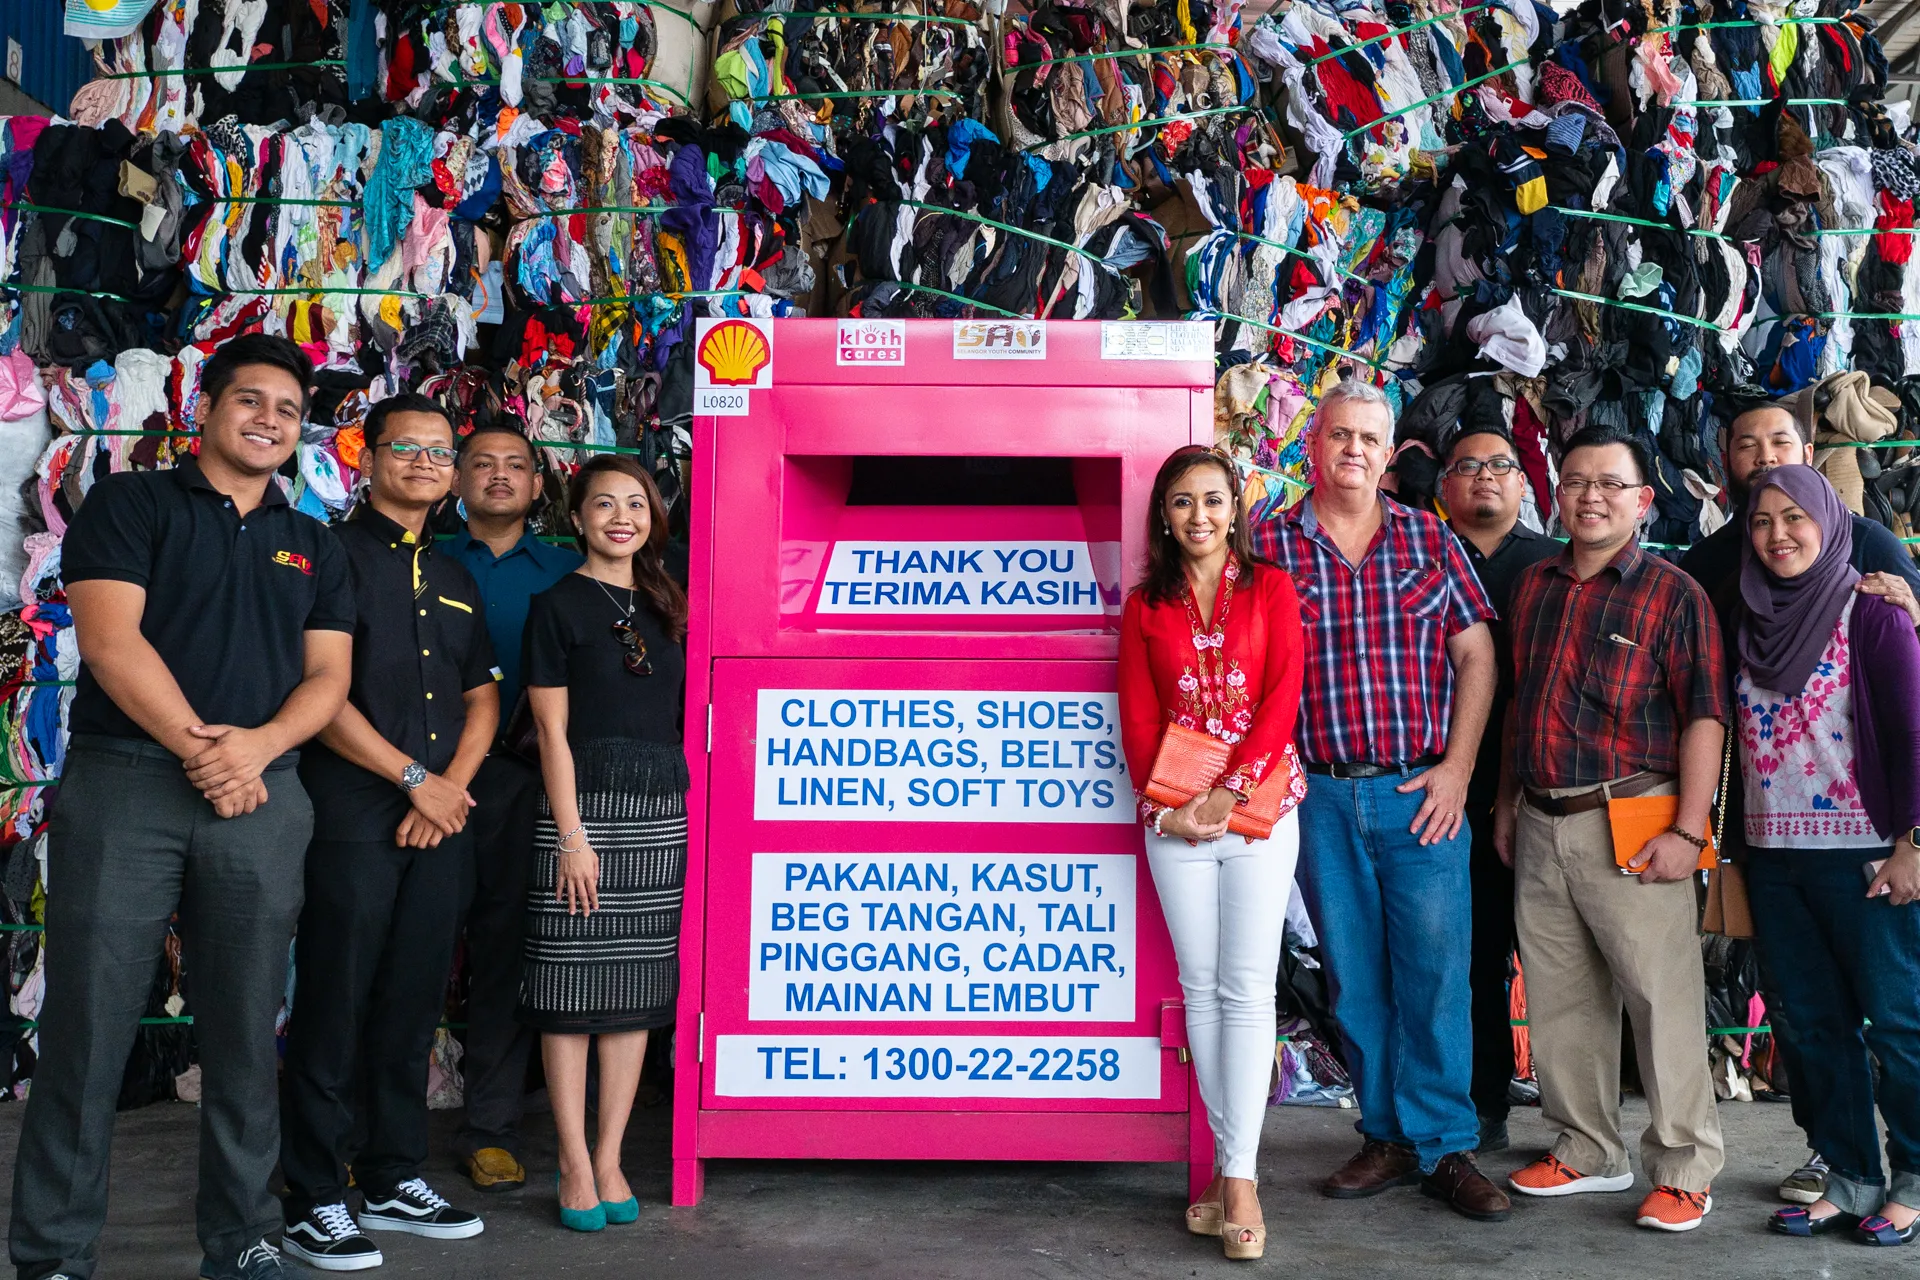 Donate clothes in kuala lumpur, Kloth Cares